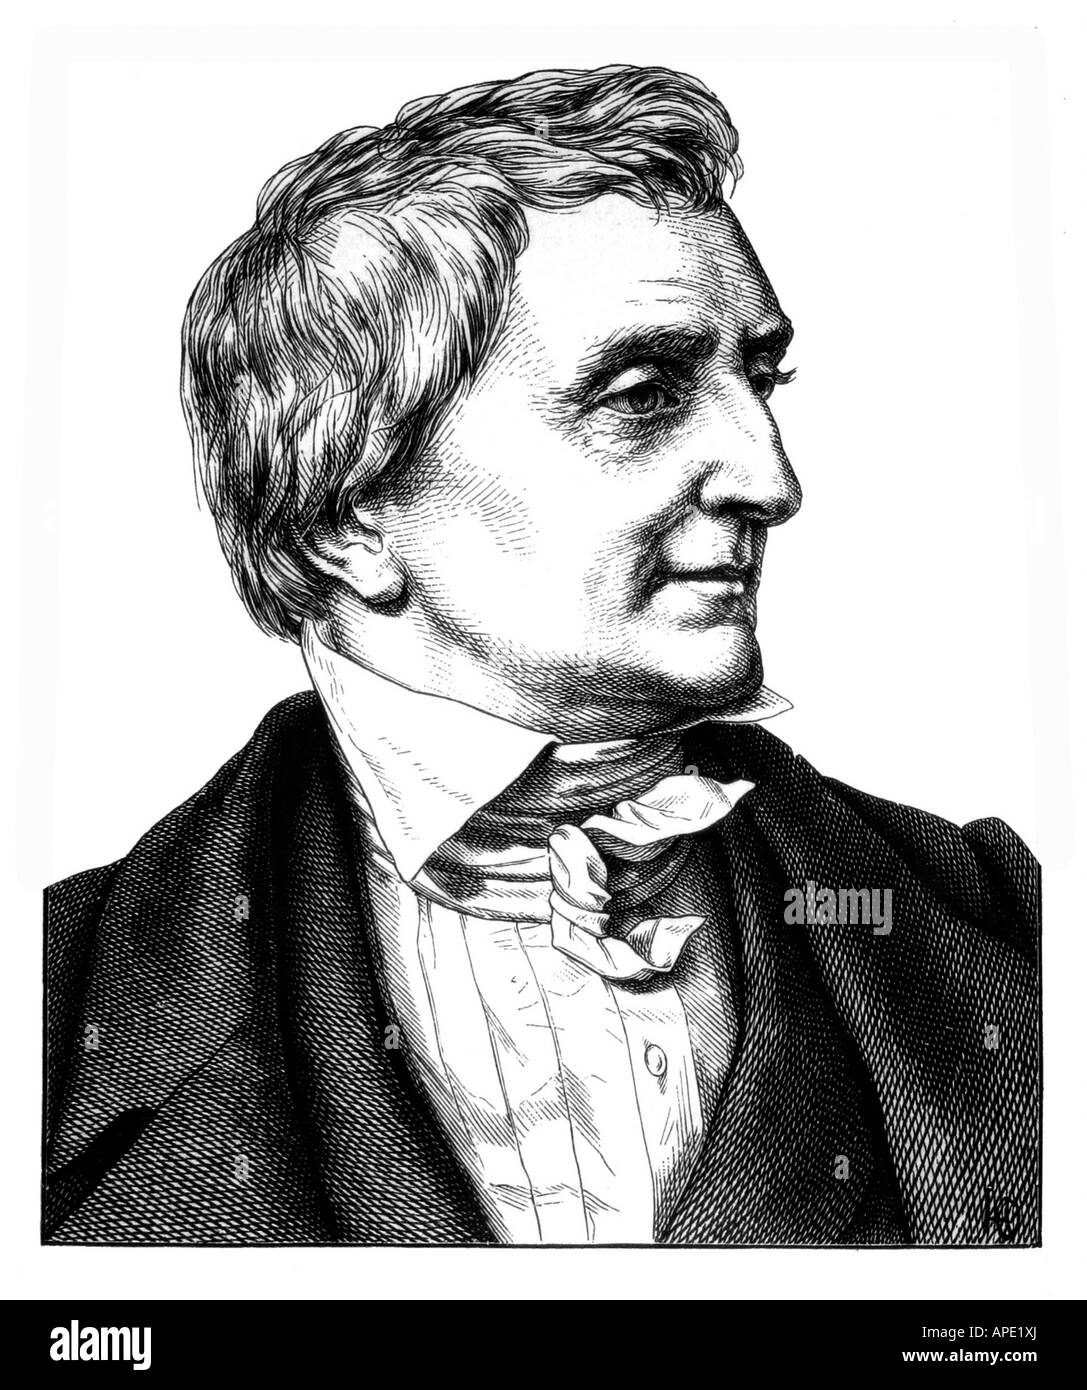 Schlosser, Friedrich Christoph, 17.11.1776 - 23.9.1861, German theologican and historian, portrait, steel engraving, 19th century, , Artist's Copyright has not to be cleared Stock Photo